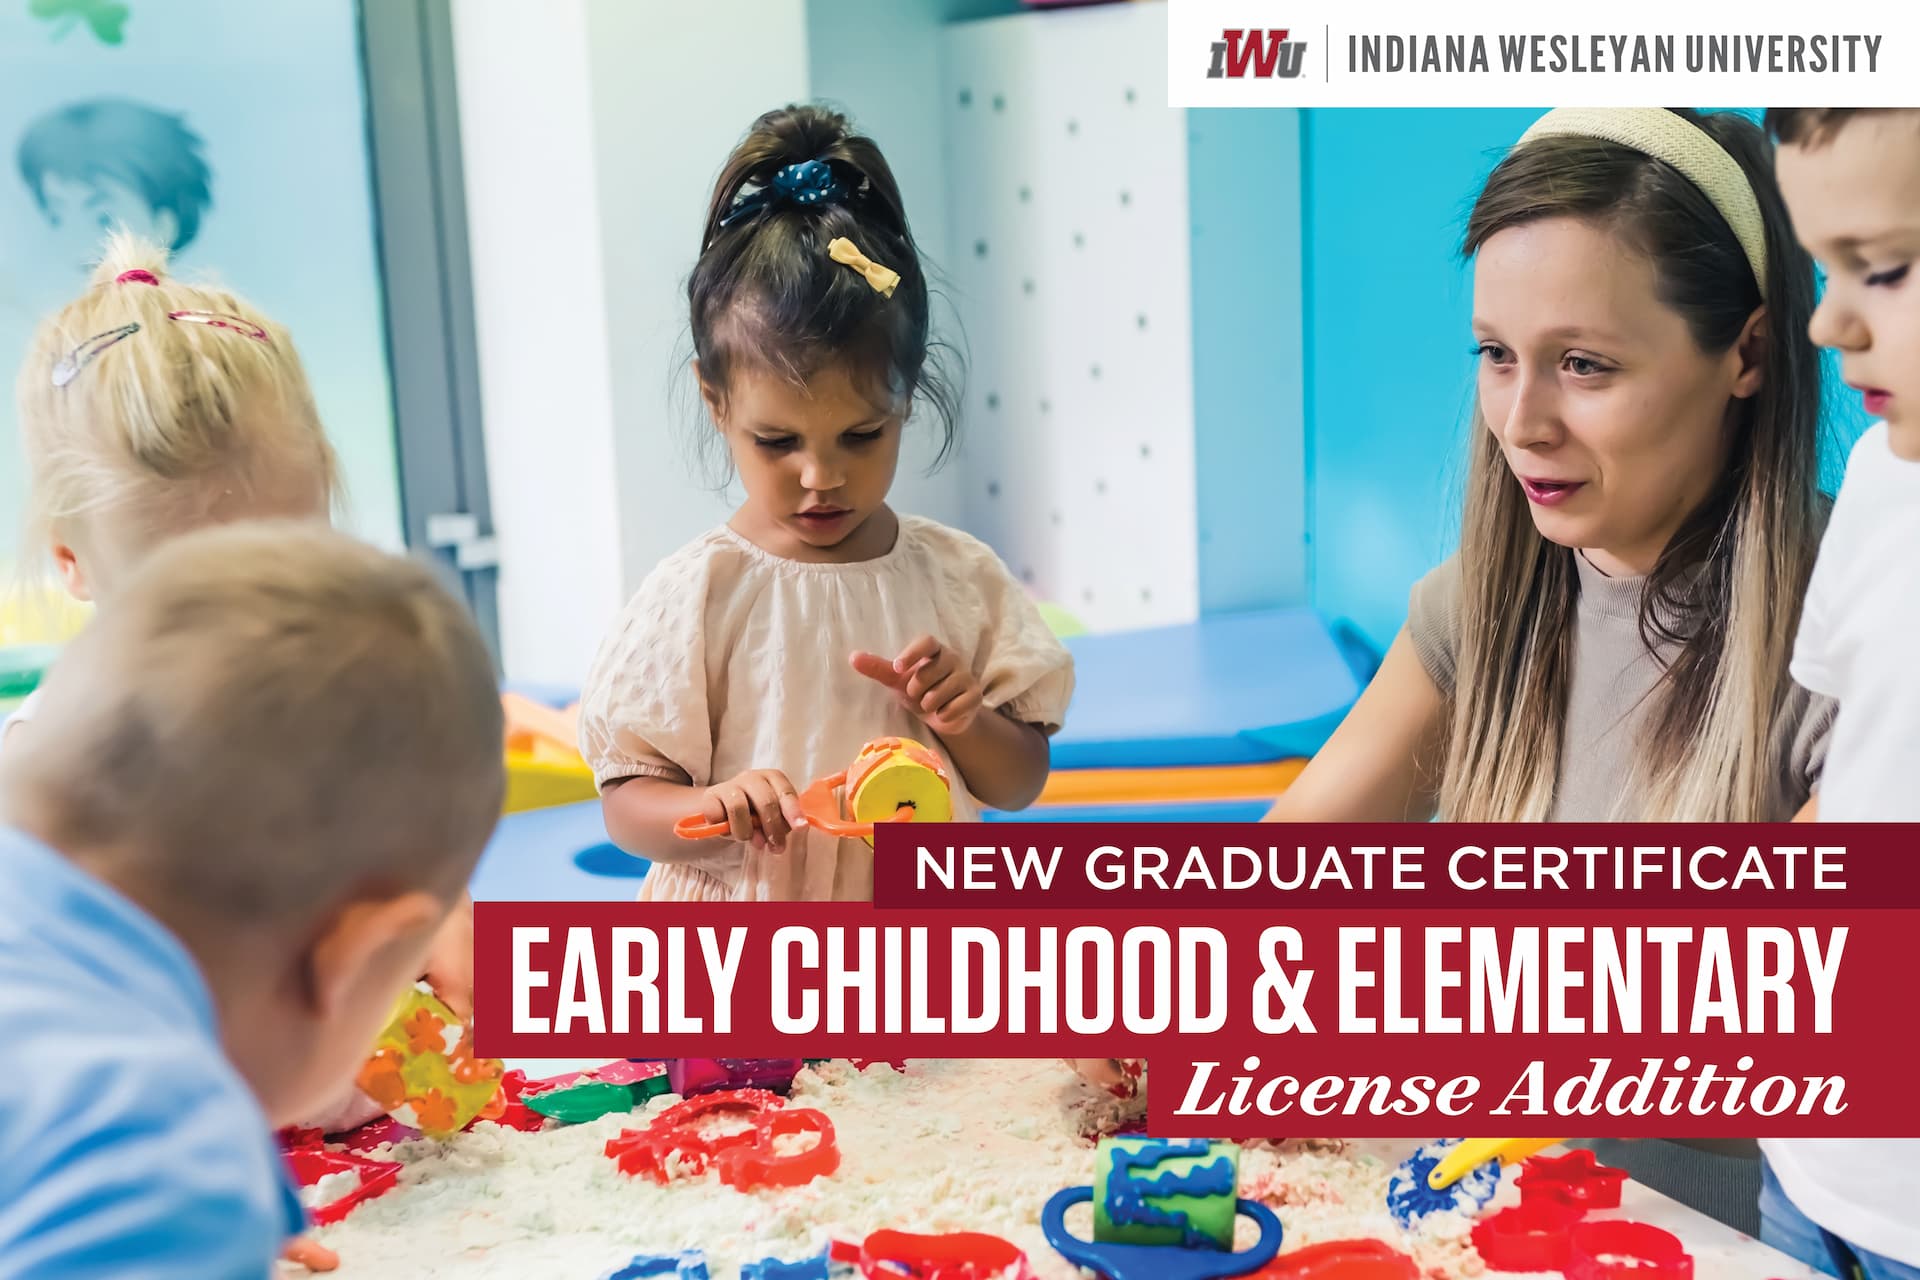 New Graduate Certificate: Early Childhood & Elementary License Addition